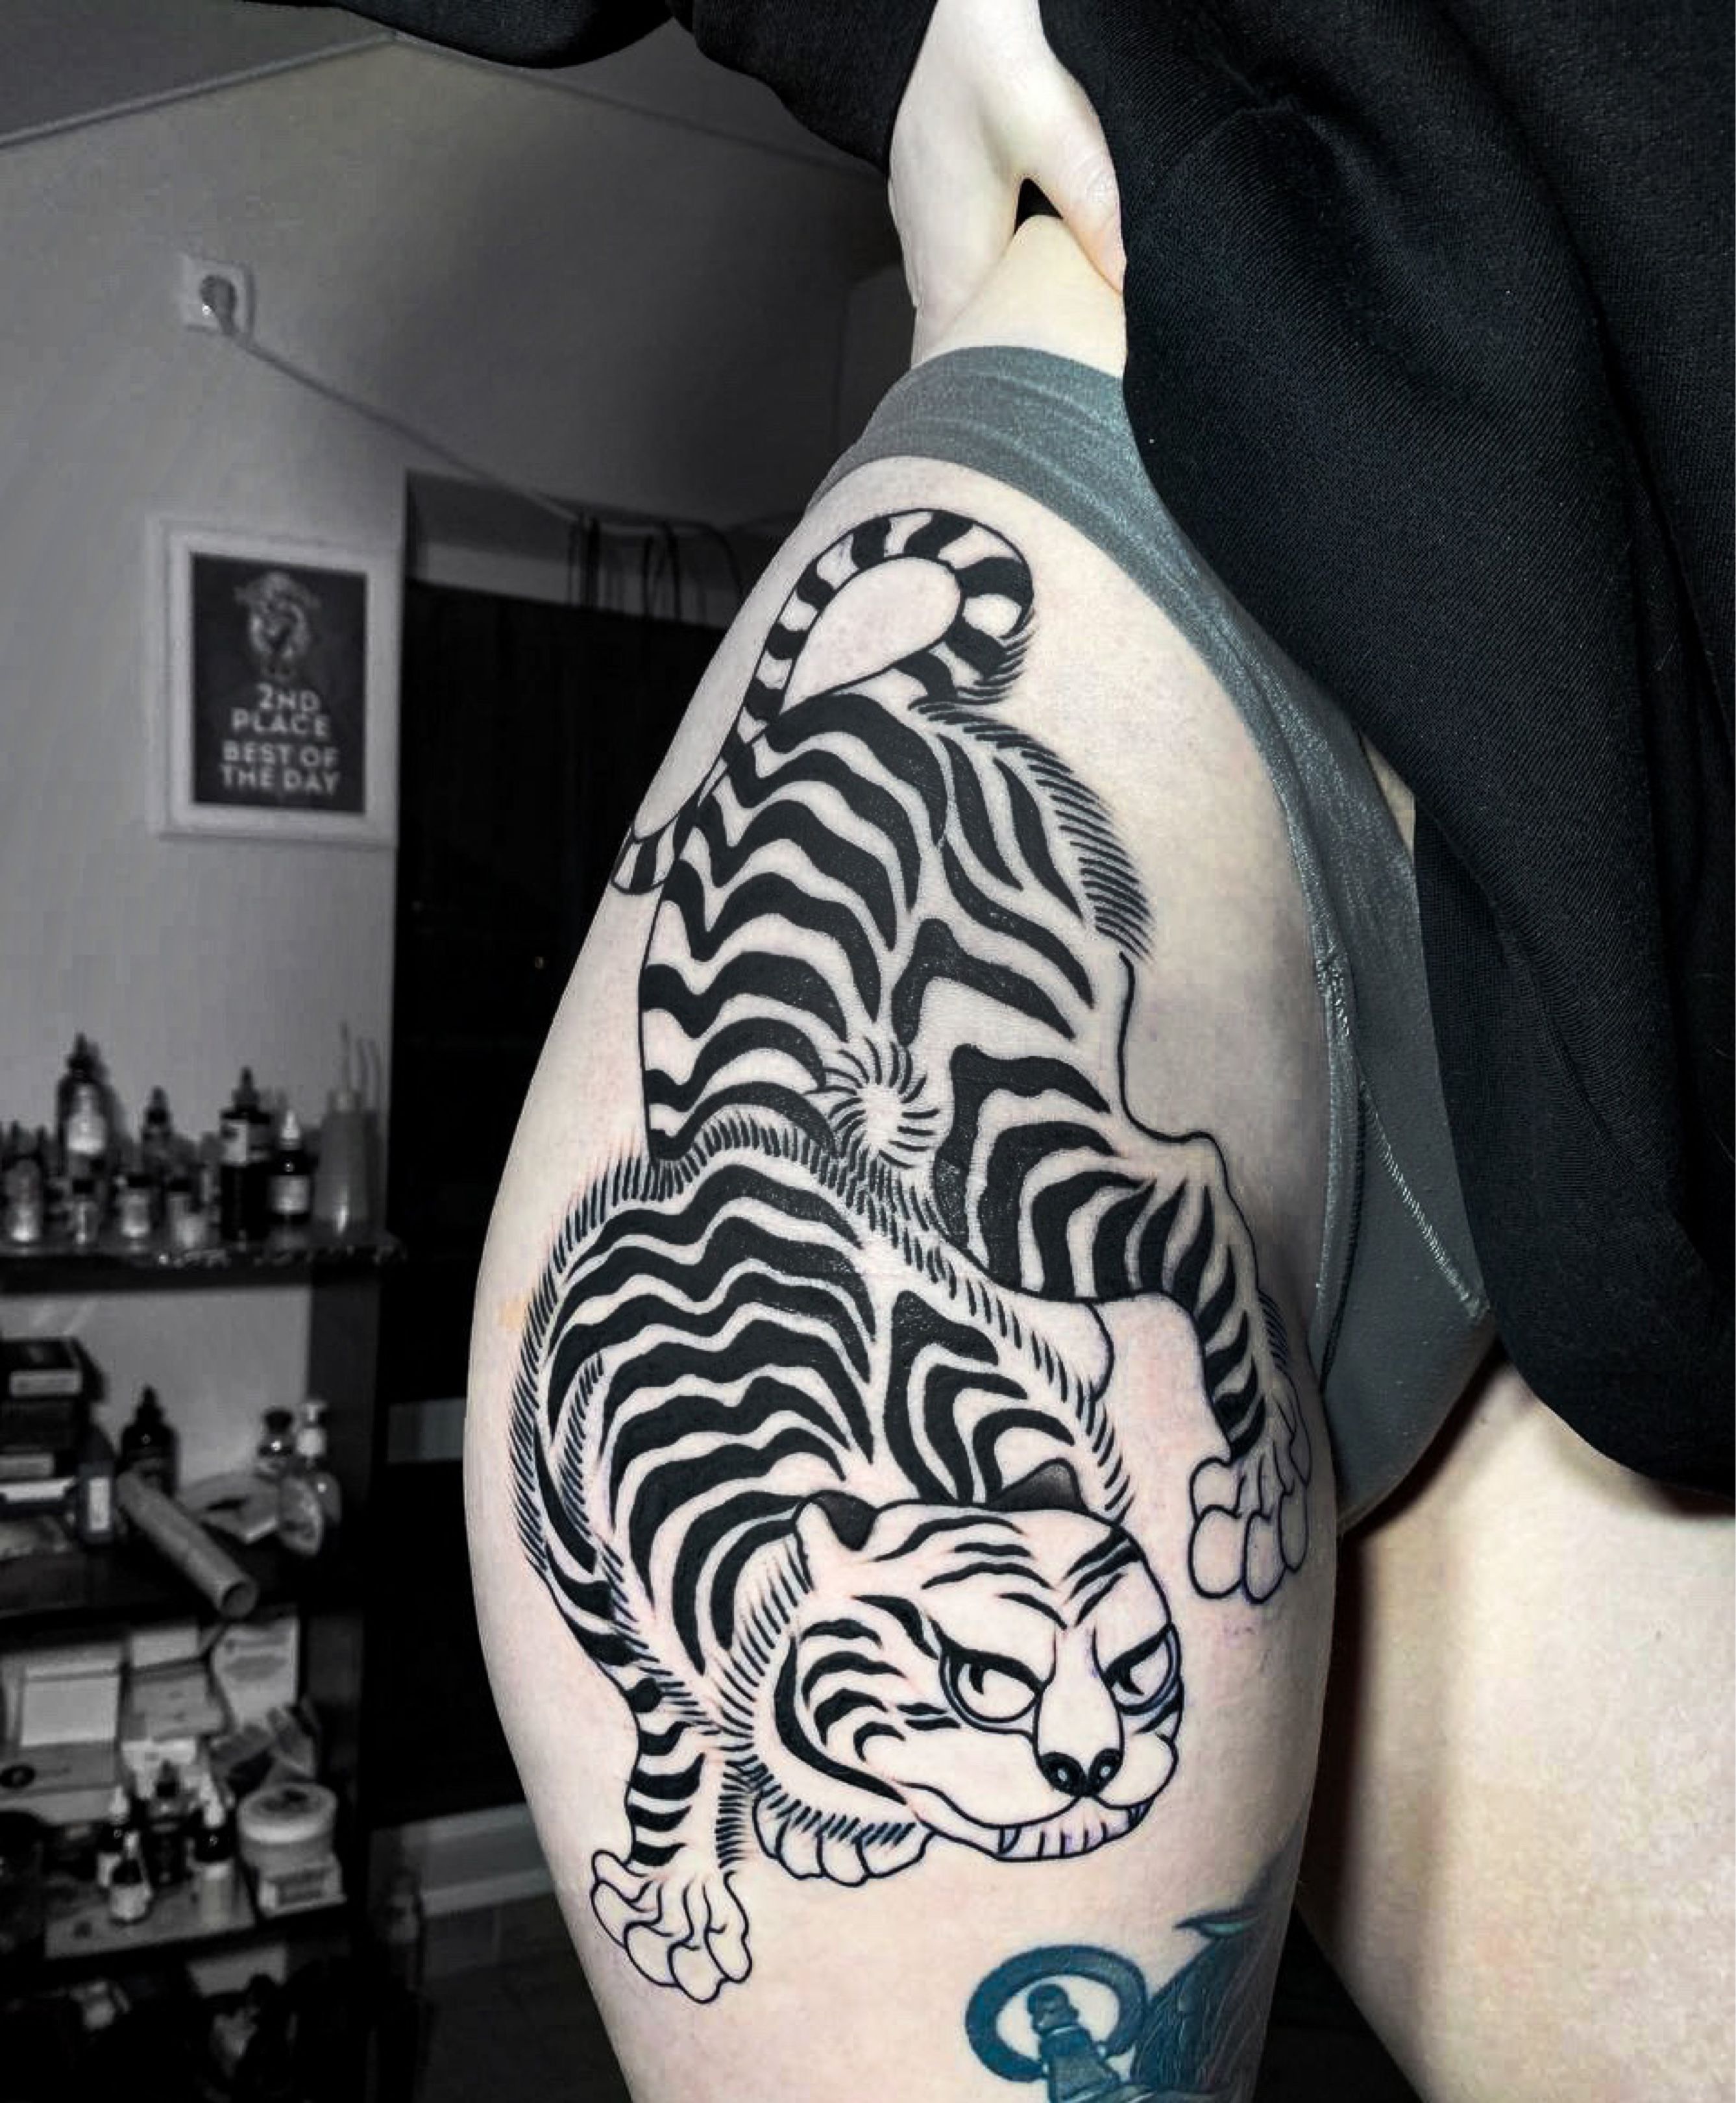 Top 101 Tiger Tattoo Ideas  2021 Inspiration Guide